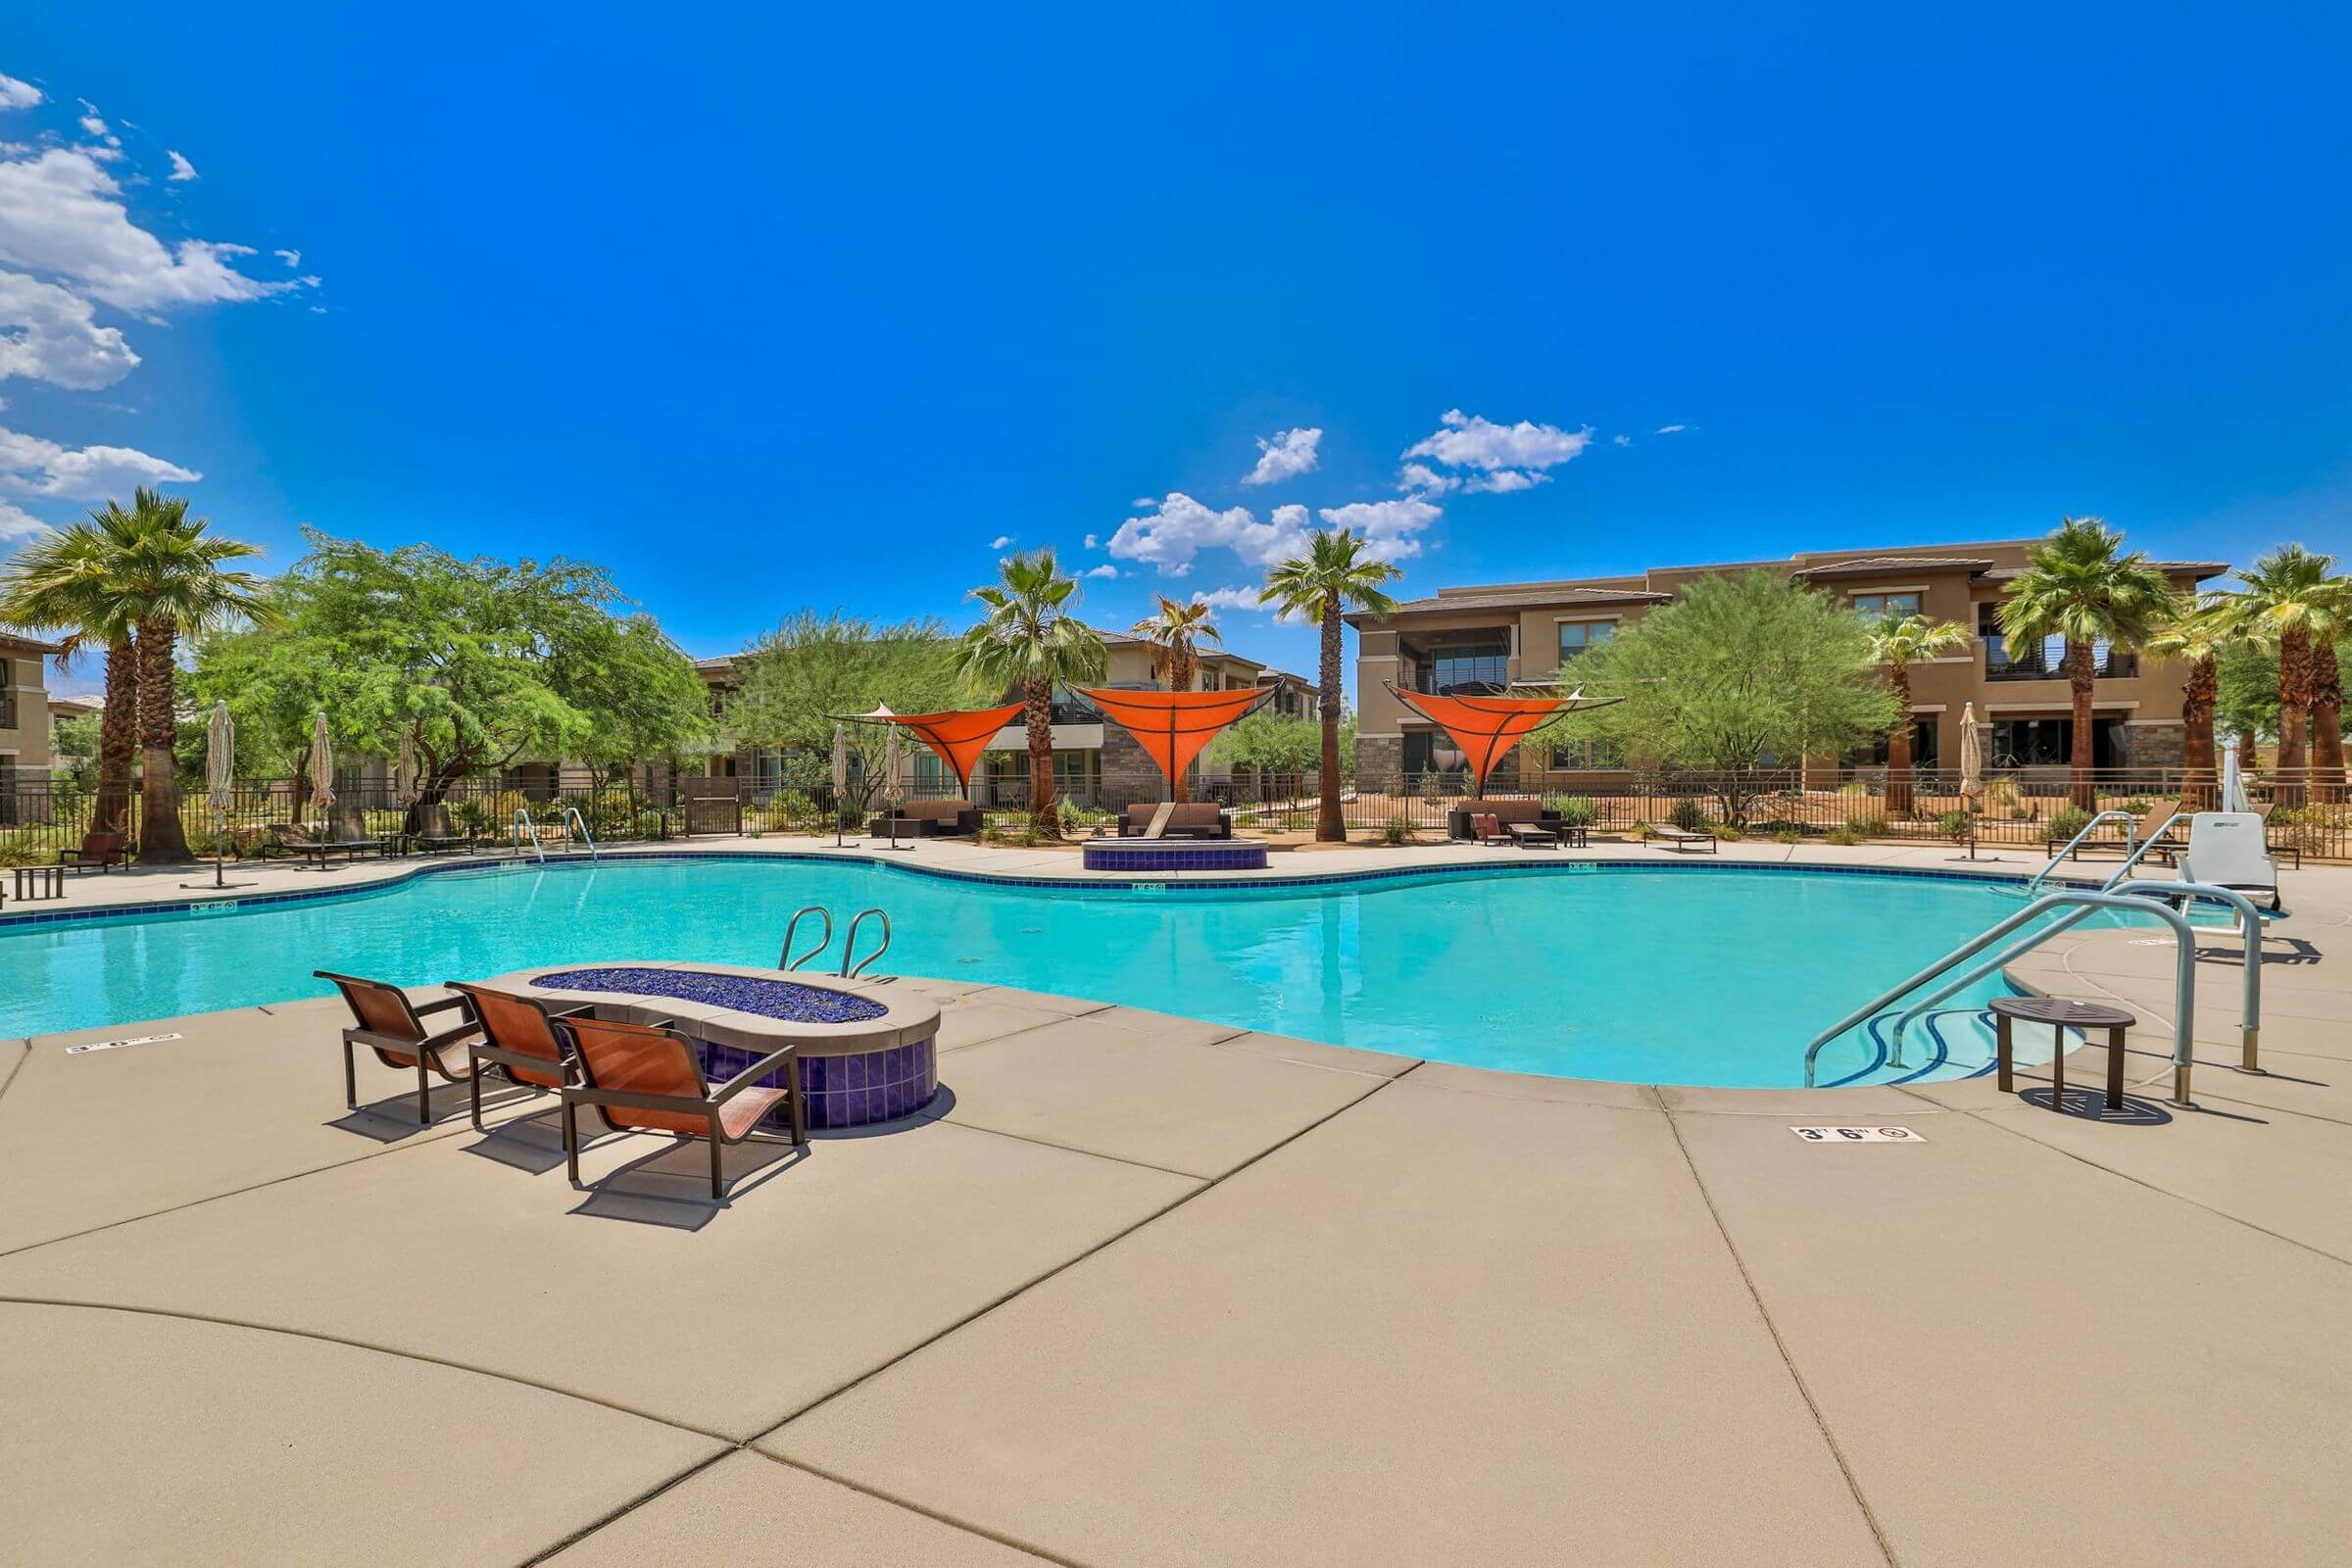 🌴 The Retreat at Desert Willow Homes For Sale ☀️ Palm Desert